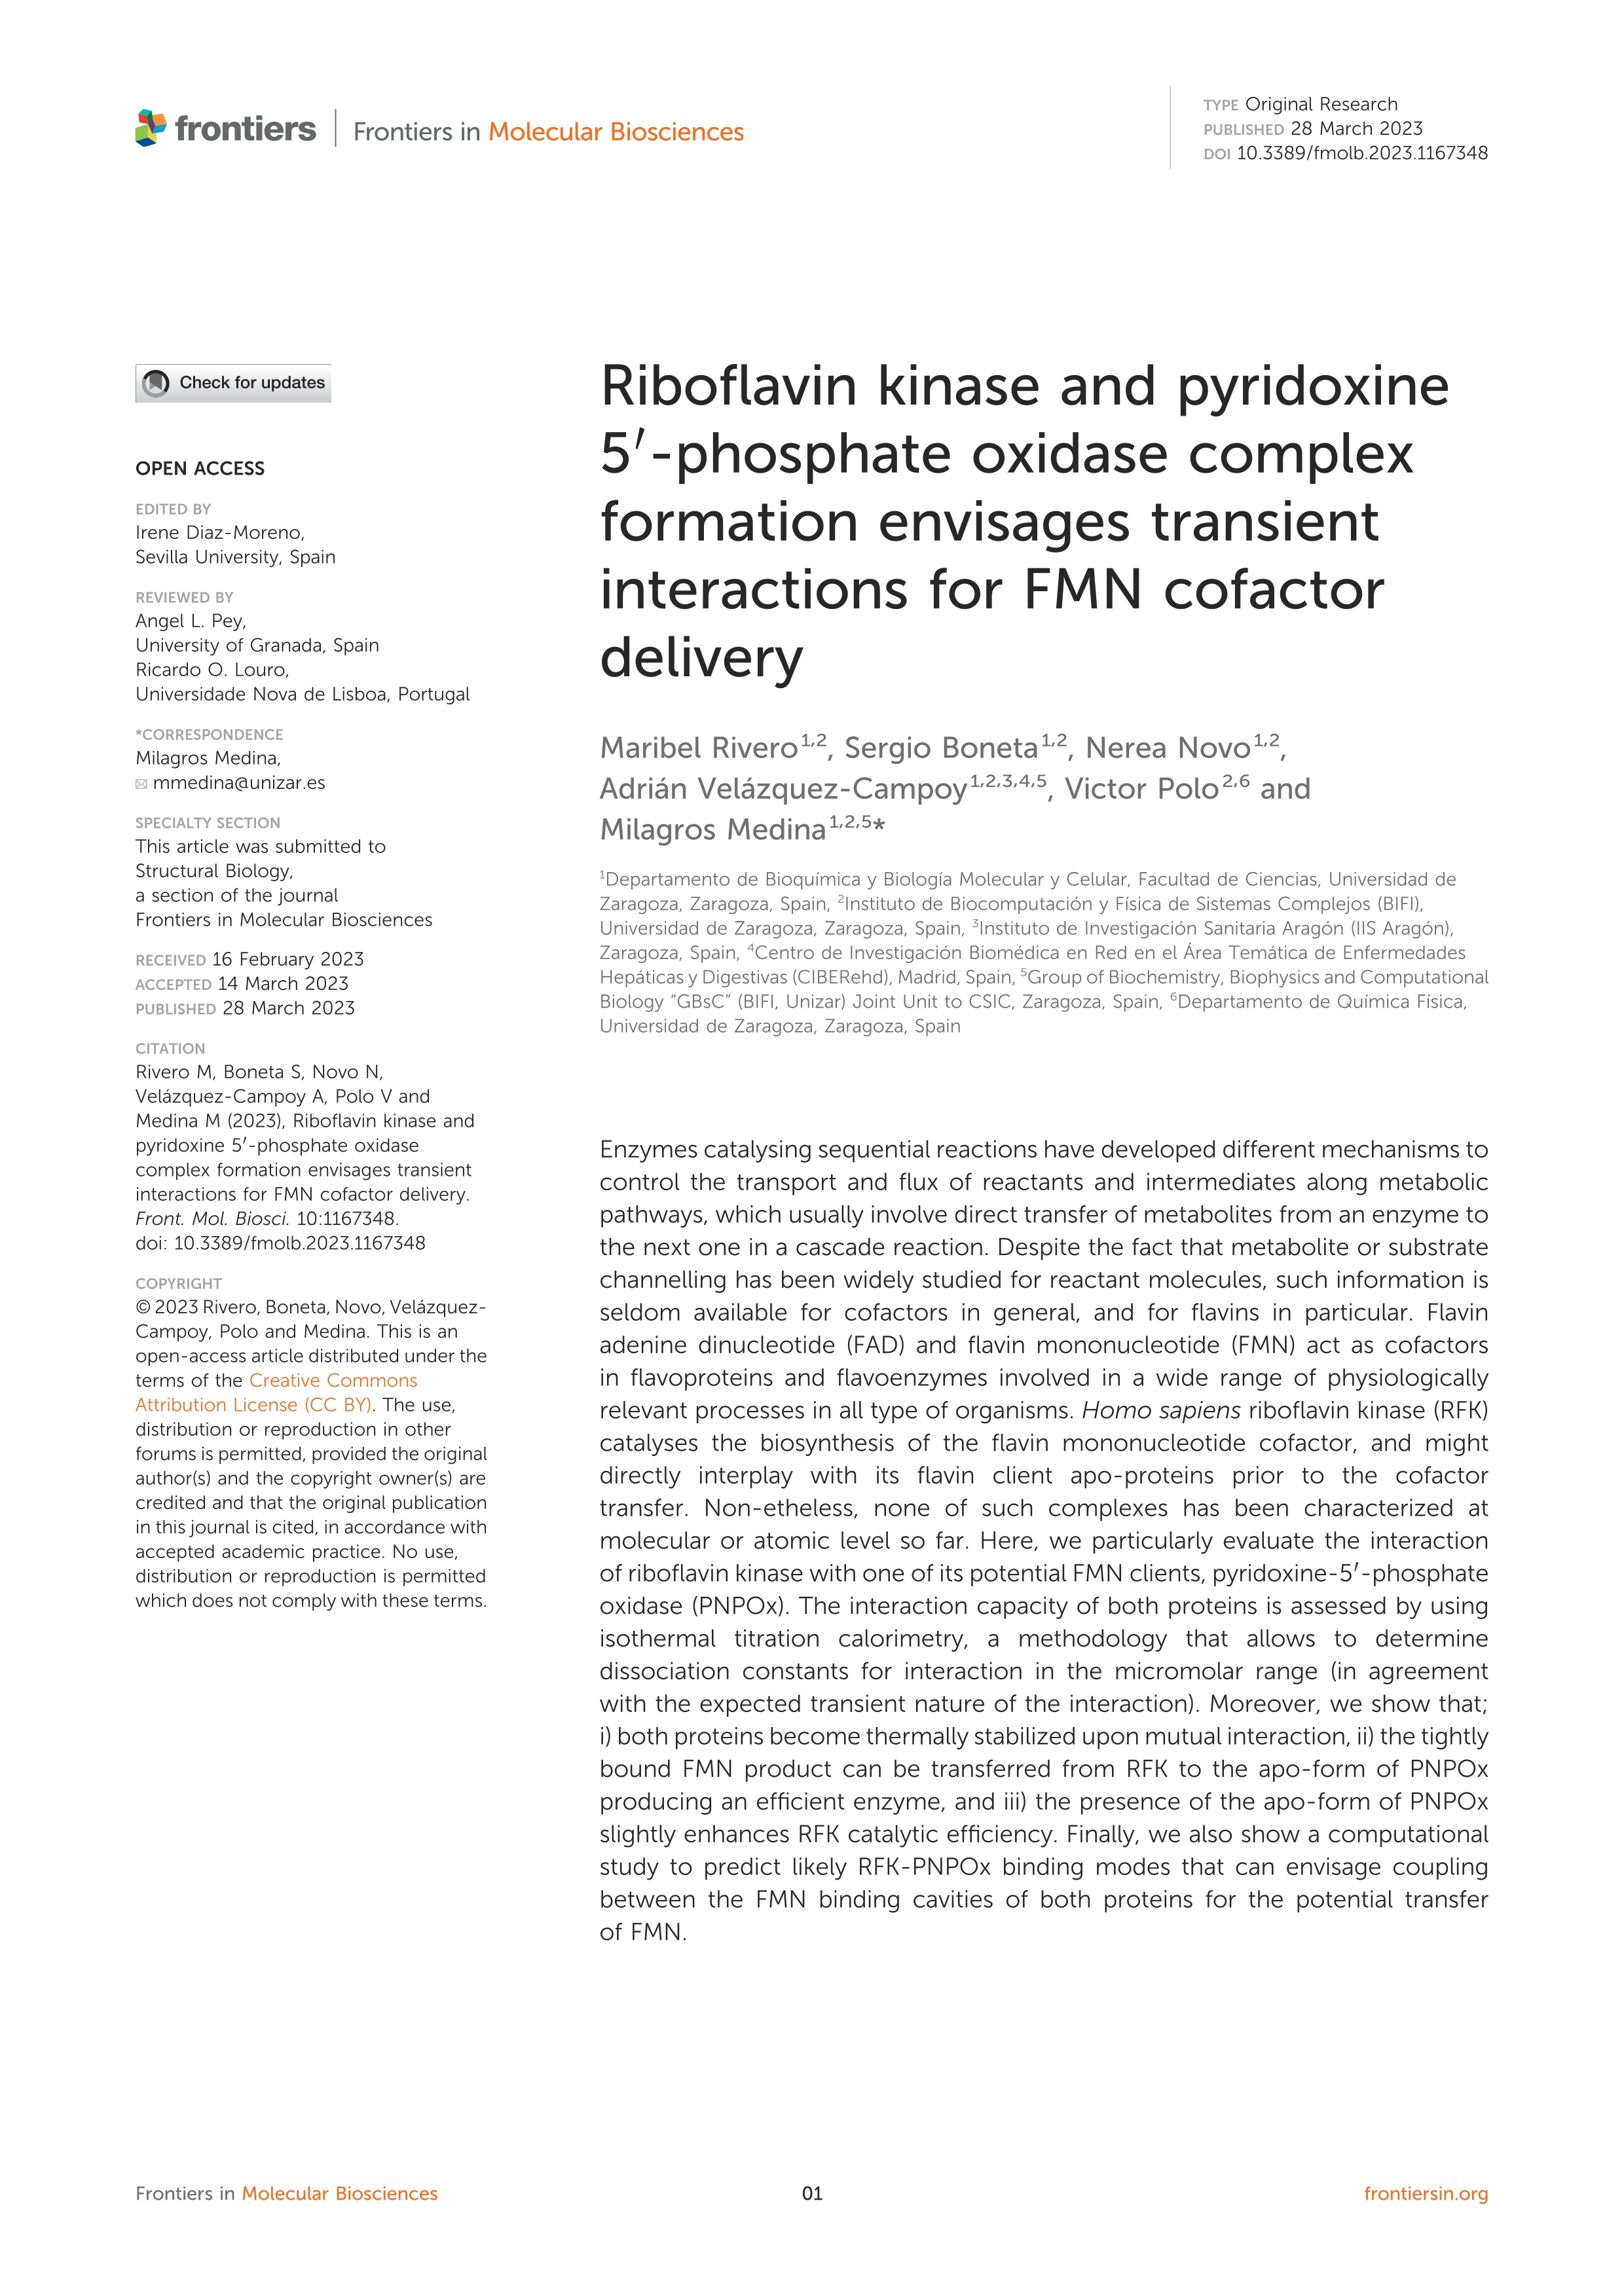 Riboflavin kinase and pyridoxine 5'-phosphate oxidase complex formation envisages transient interactions for FMN cofactor delivery